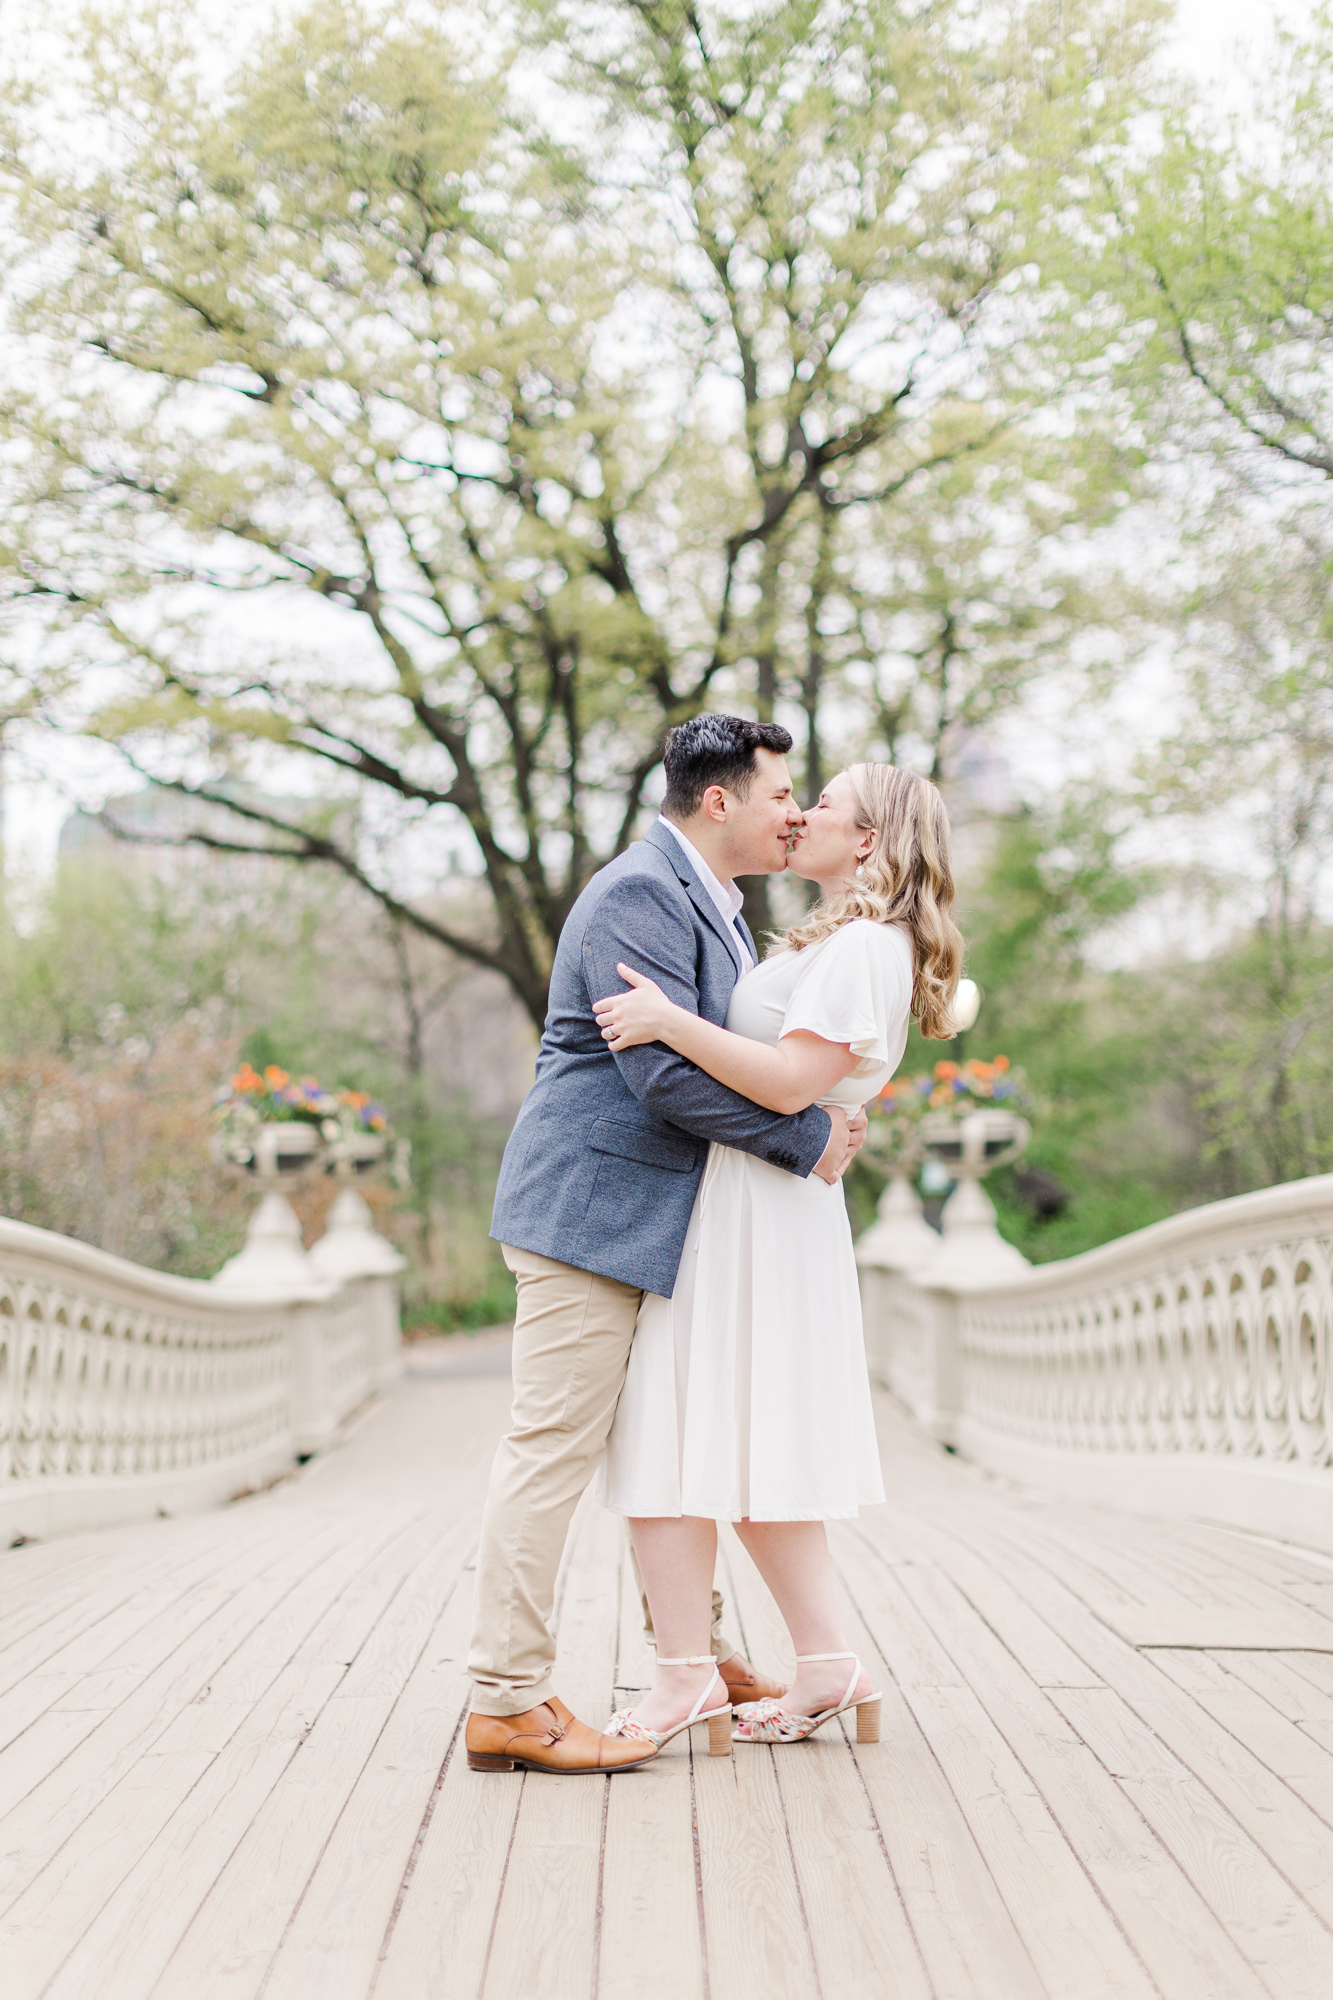 Gorgeous Engagement Pictures in Central Park